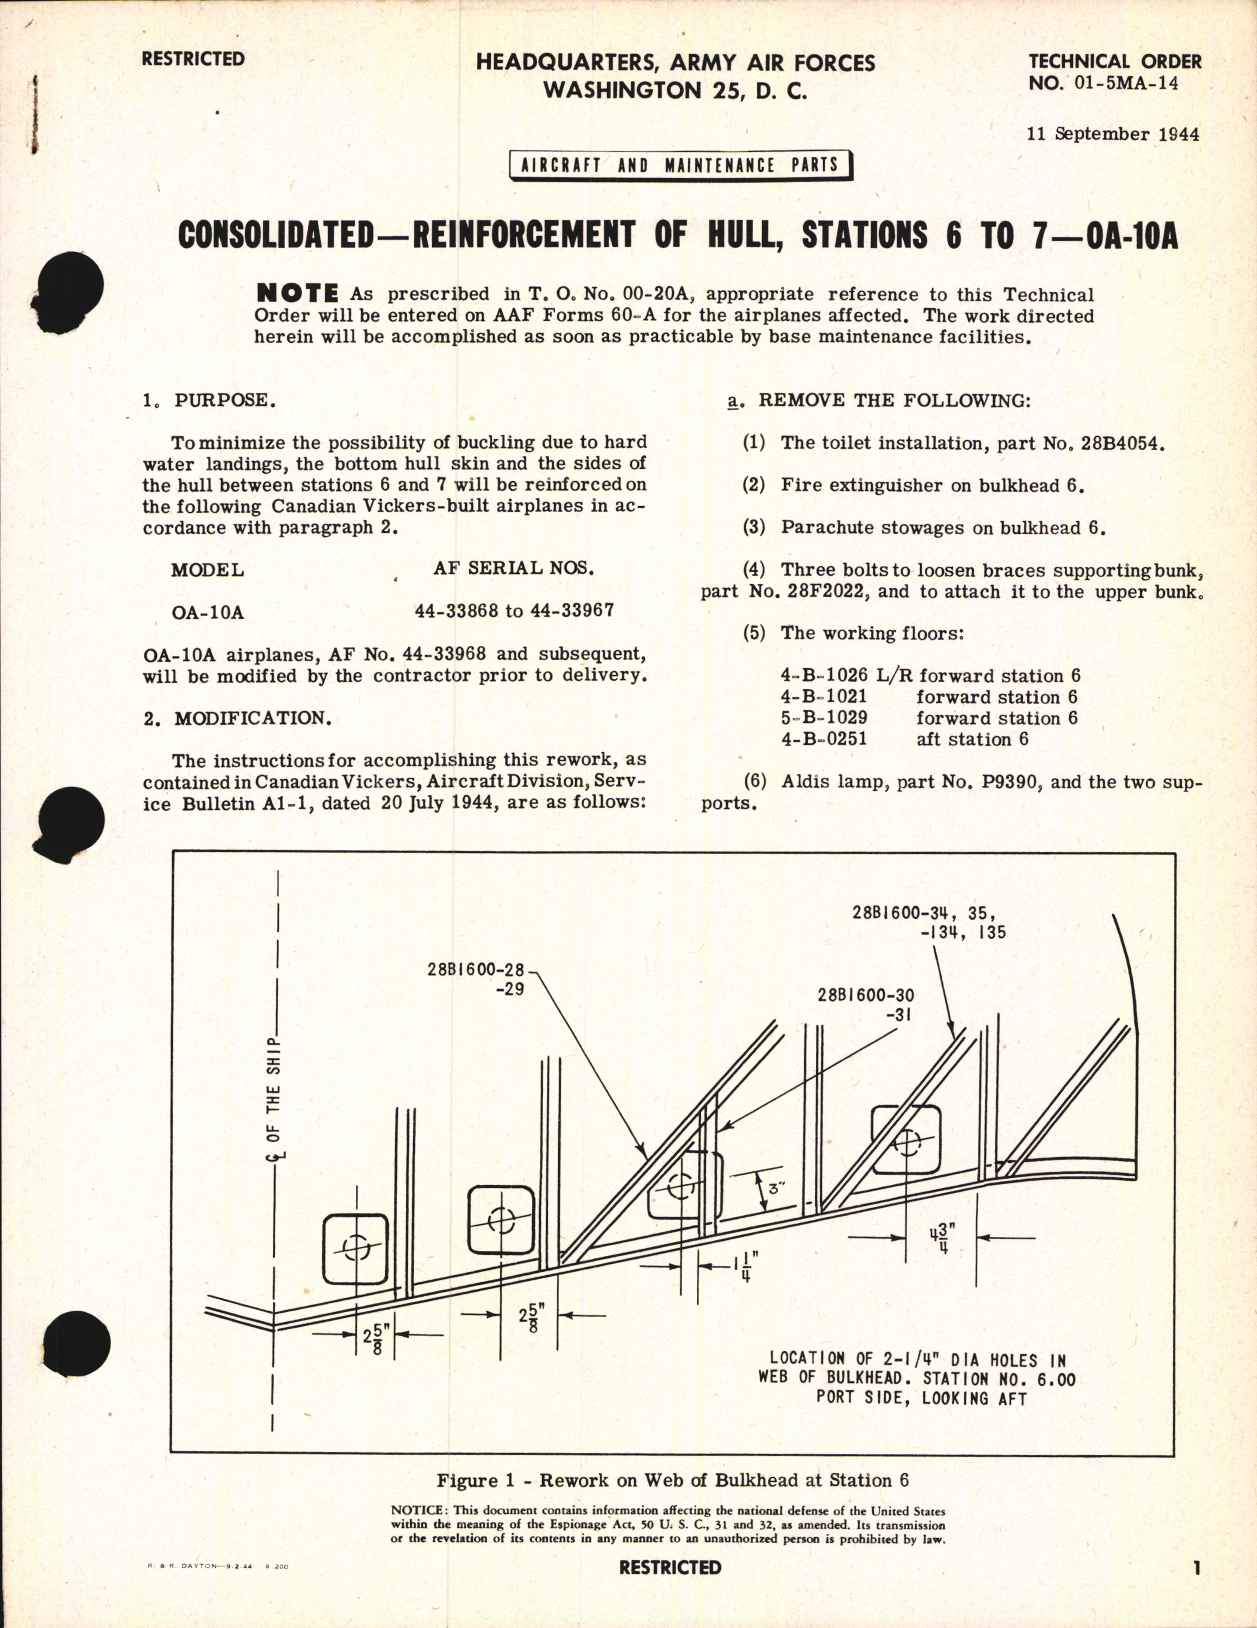 Sample page 1 from AirCorps Library document: Reinforcement of Hull, Stations 6 to 7 for OA-10A